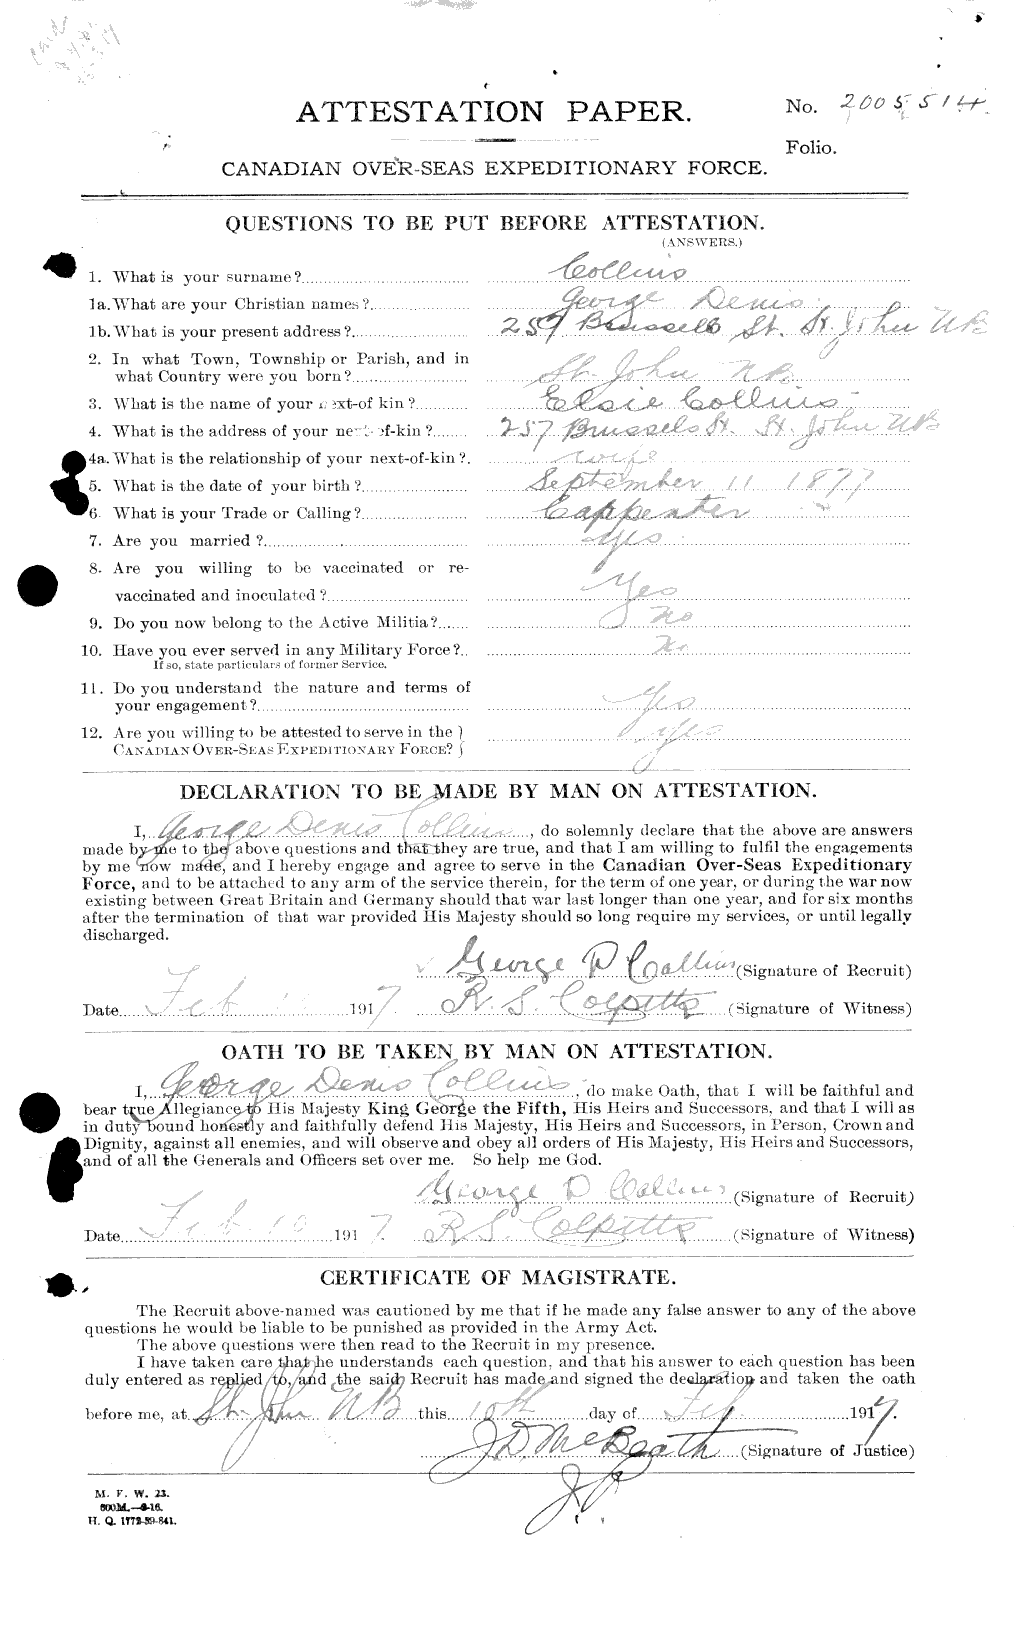 Personnel Records of the First World War - CEF 037859c